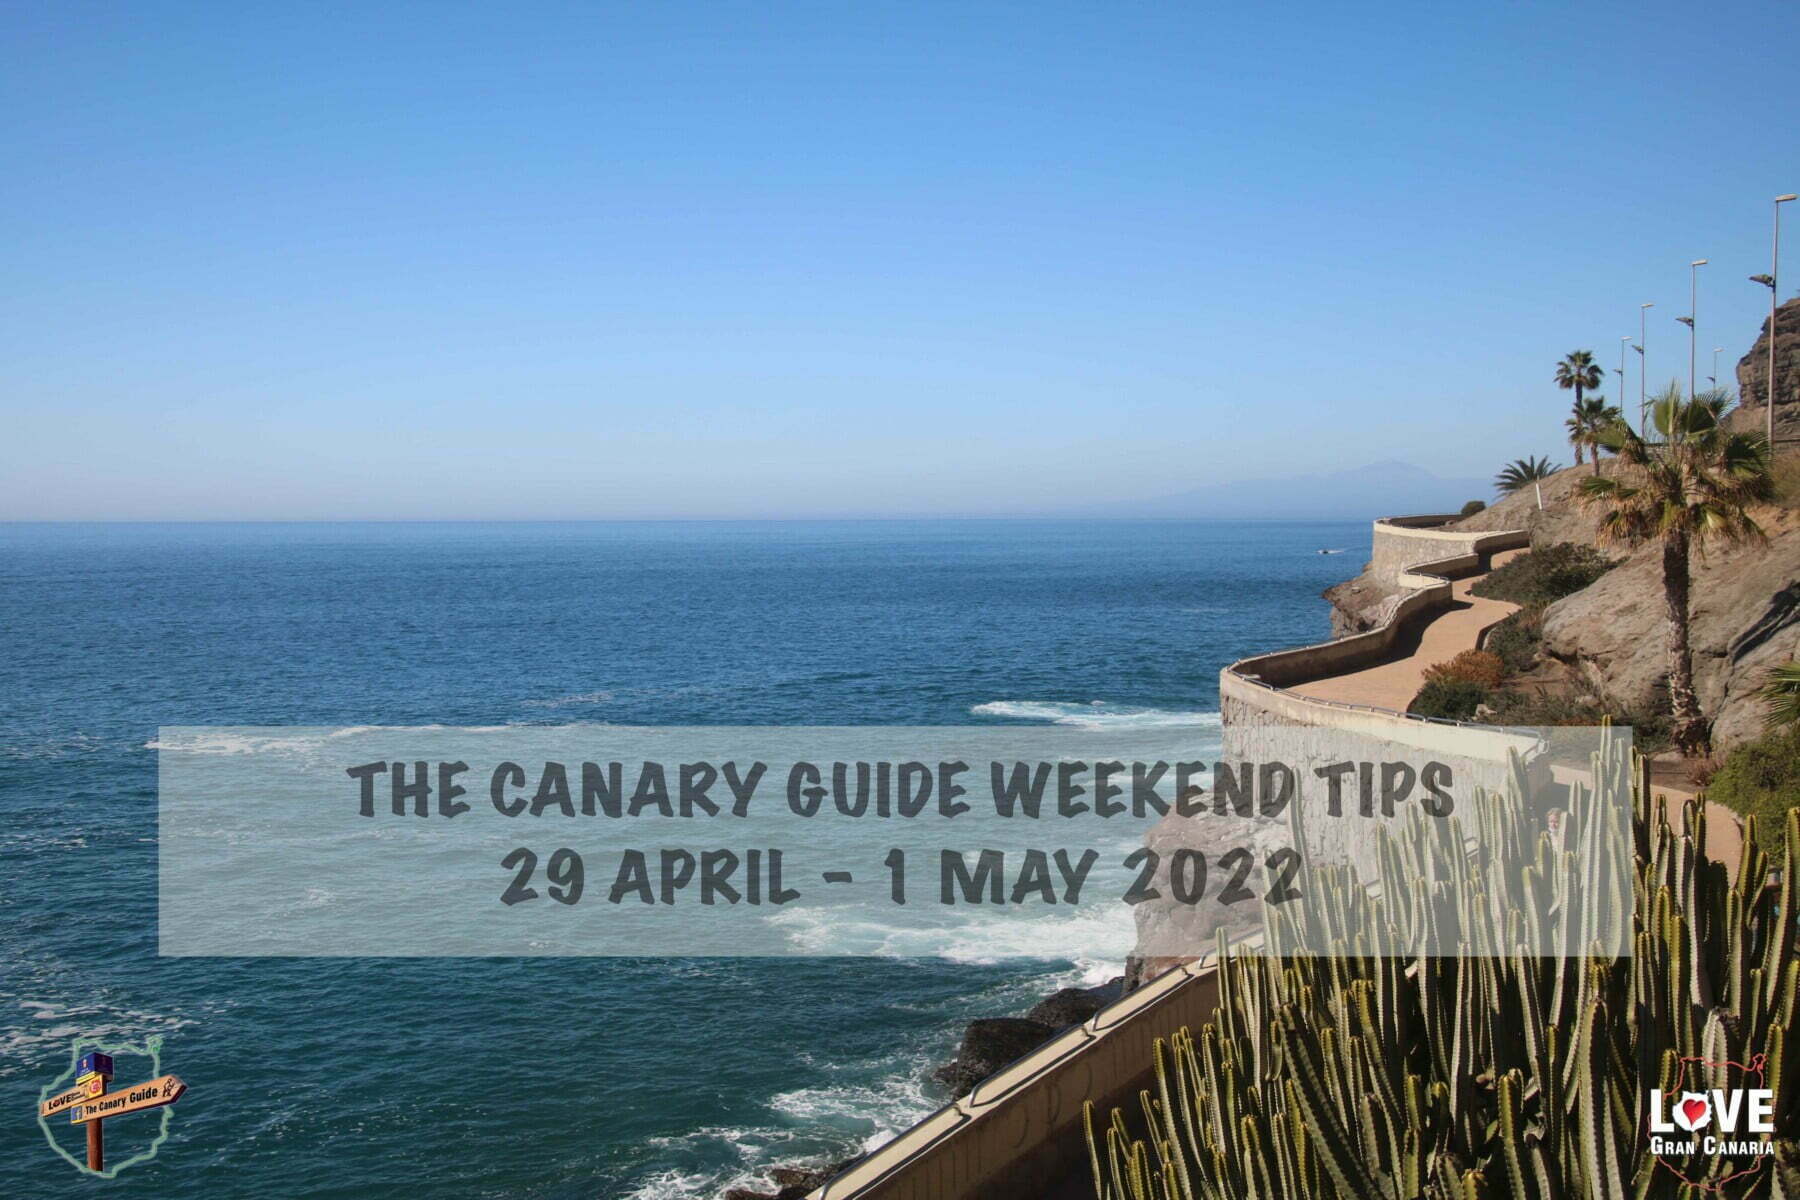 The Canary Guide “May Day” Weekend Tips 29 April – 1 May 2022